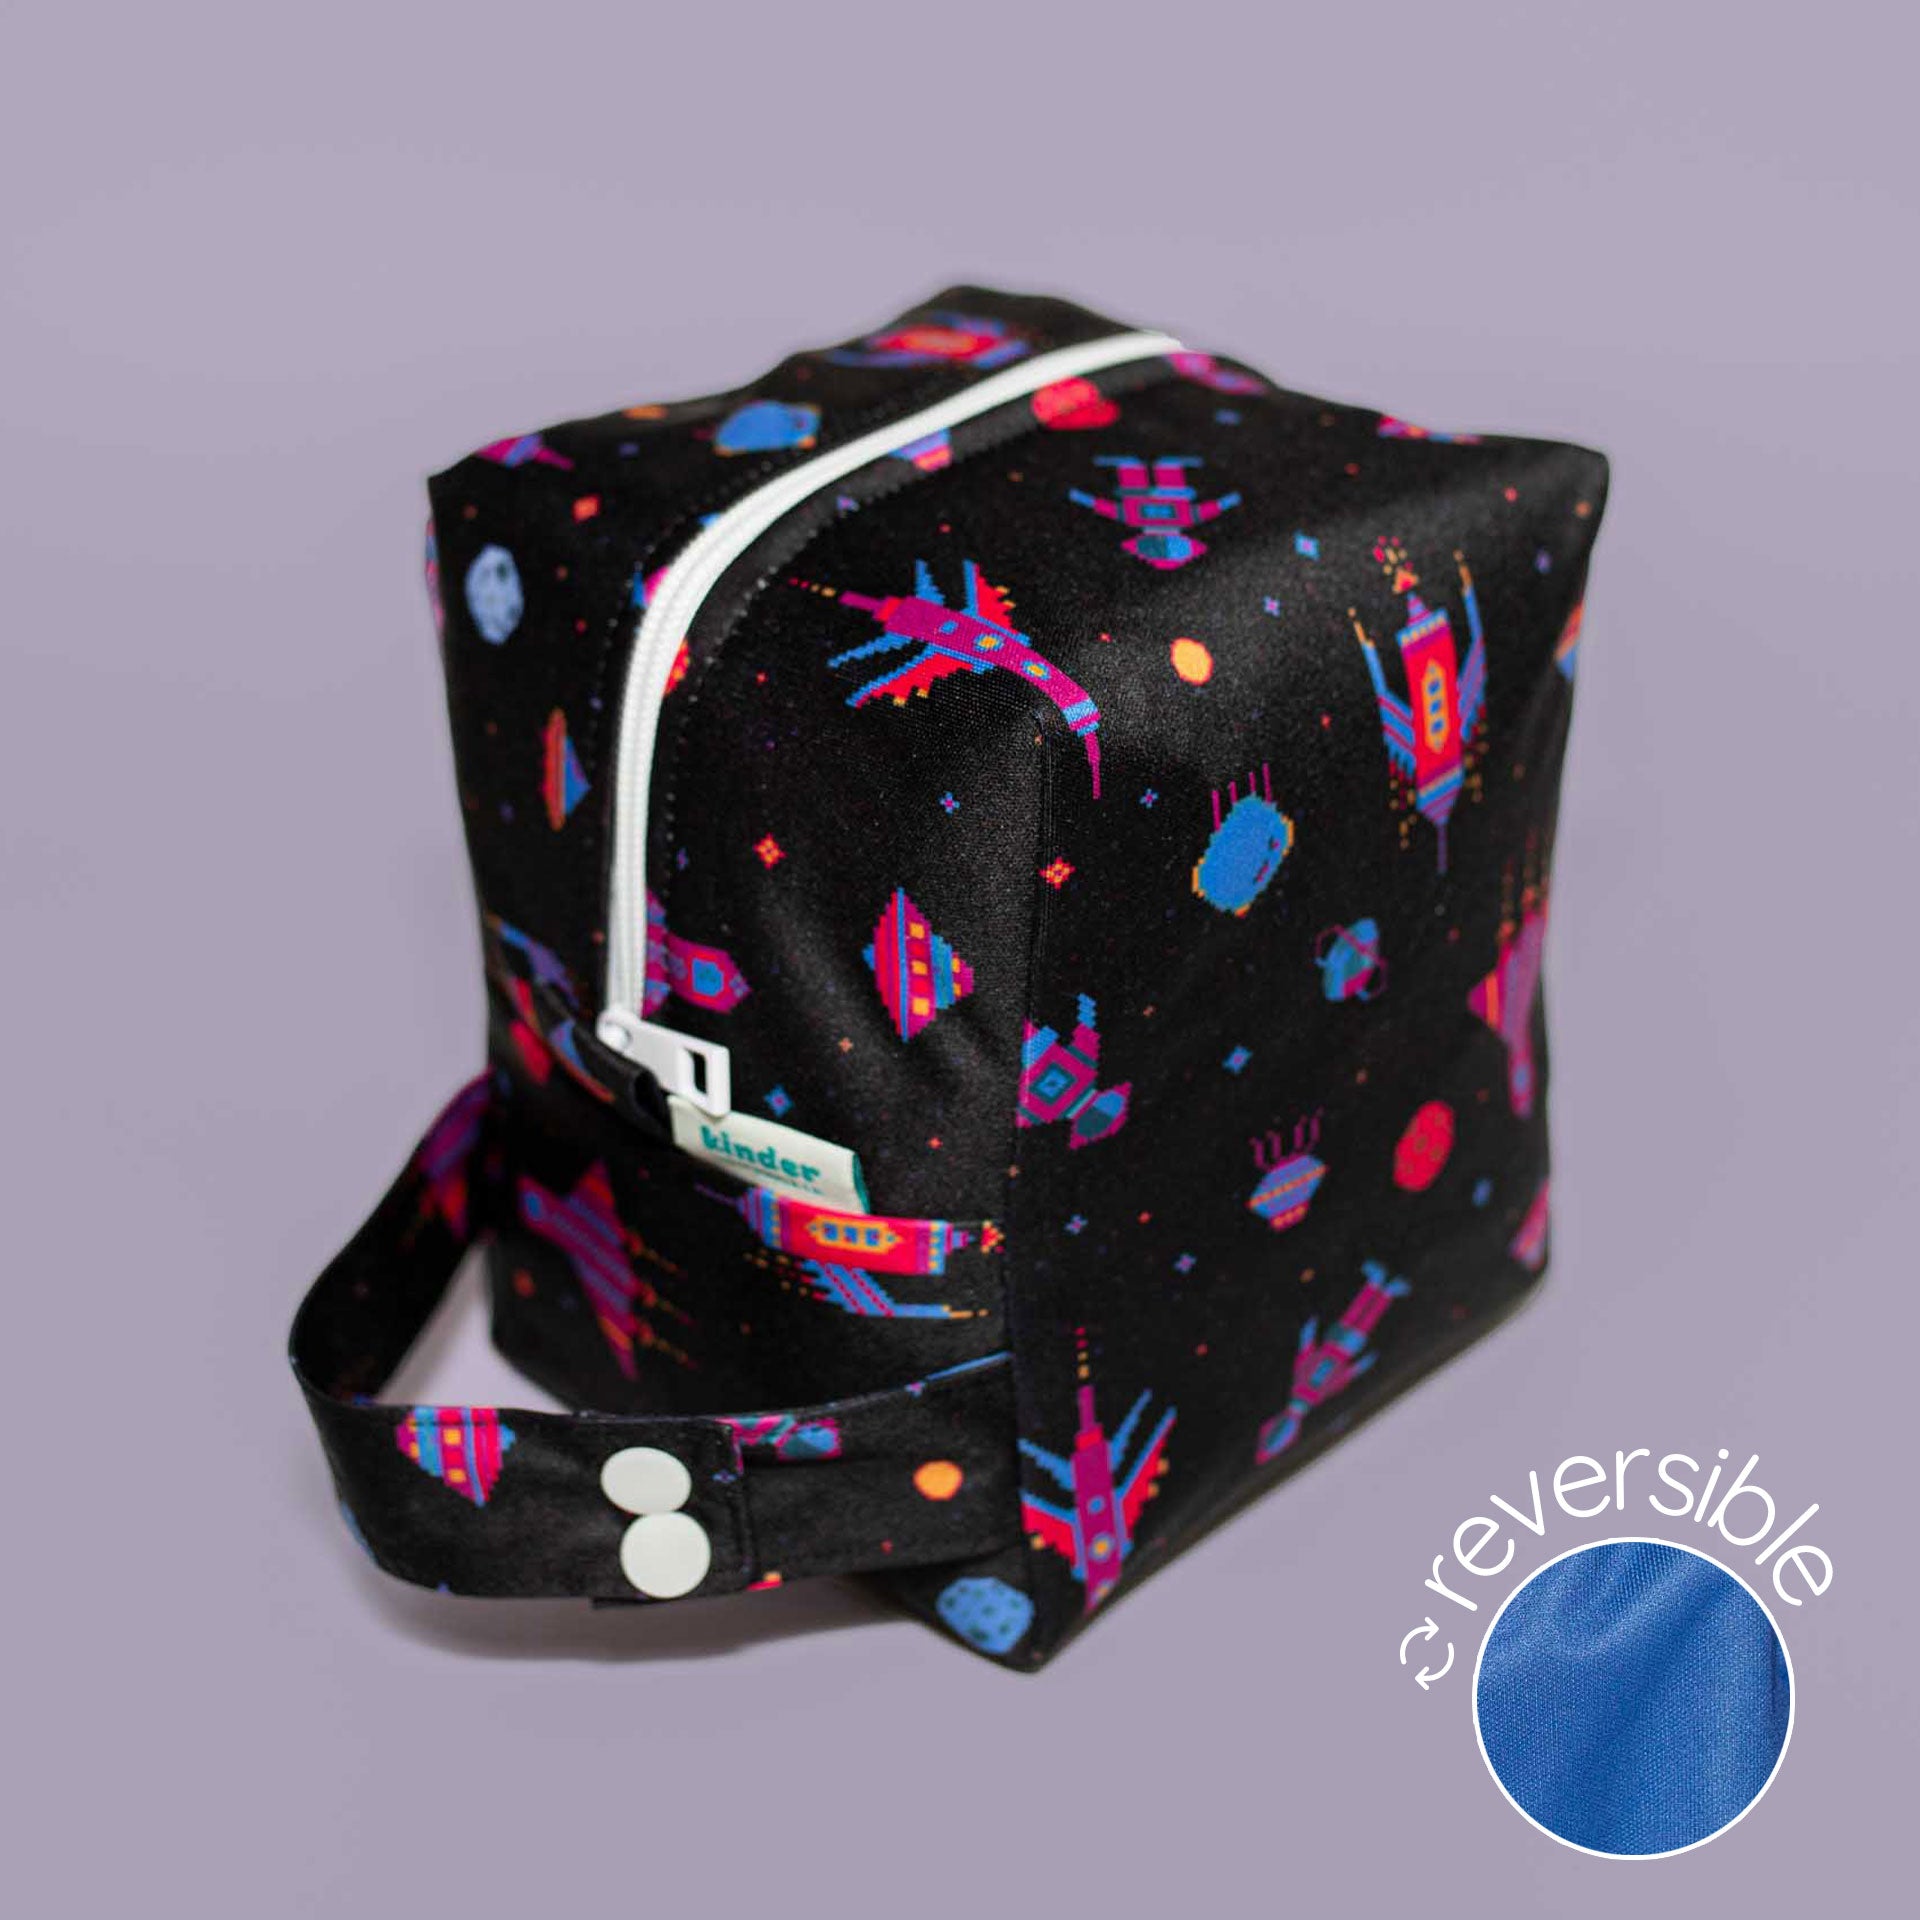 water resistant storage cube mini small storage pod zipper cube for travel pul cloth diaper pod travel bag black vintage meteor asteroids space pixel small business shop small